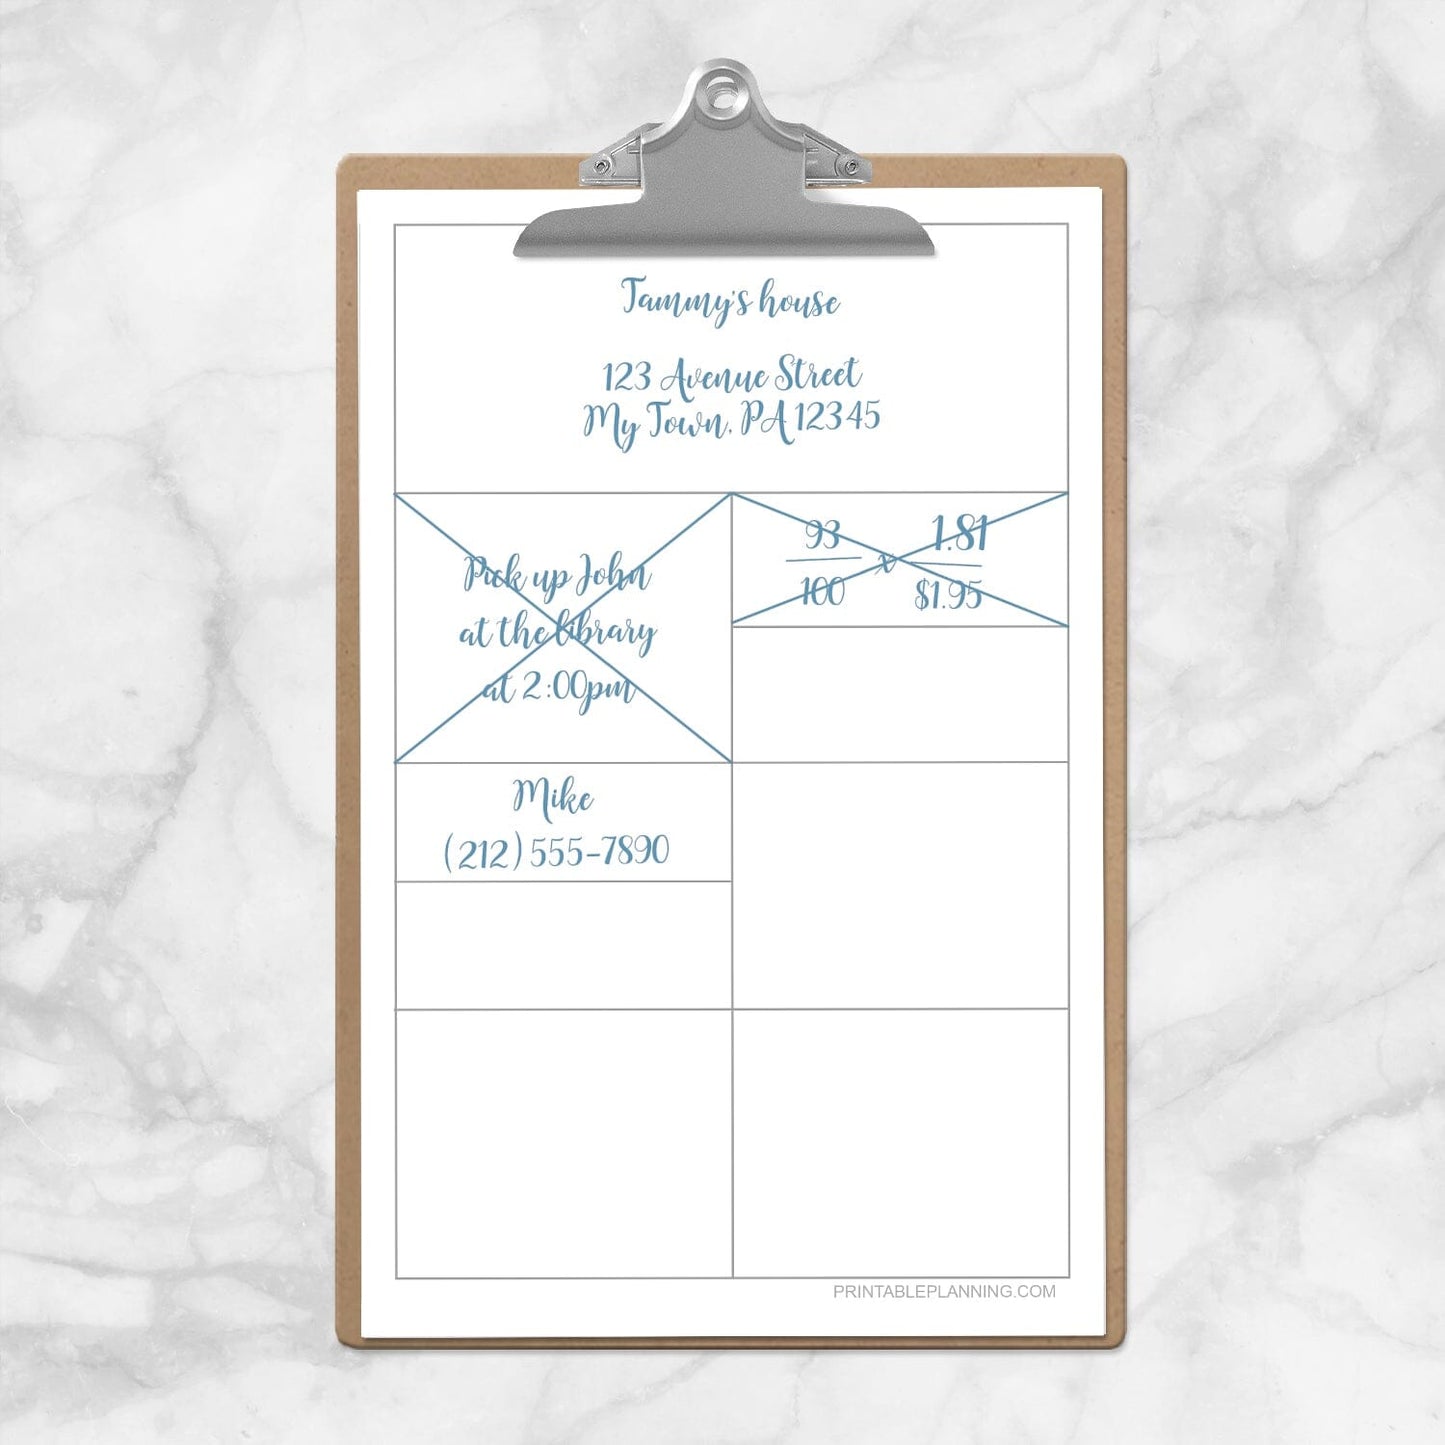 Printable Compartmentalized Scratch Paper - Half Page at Printable Planning. Example of half page on mini clipboard.